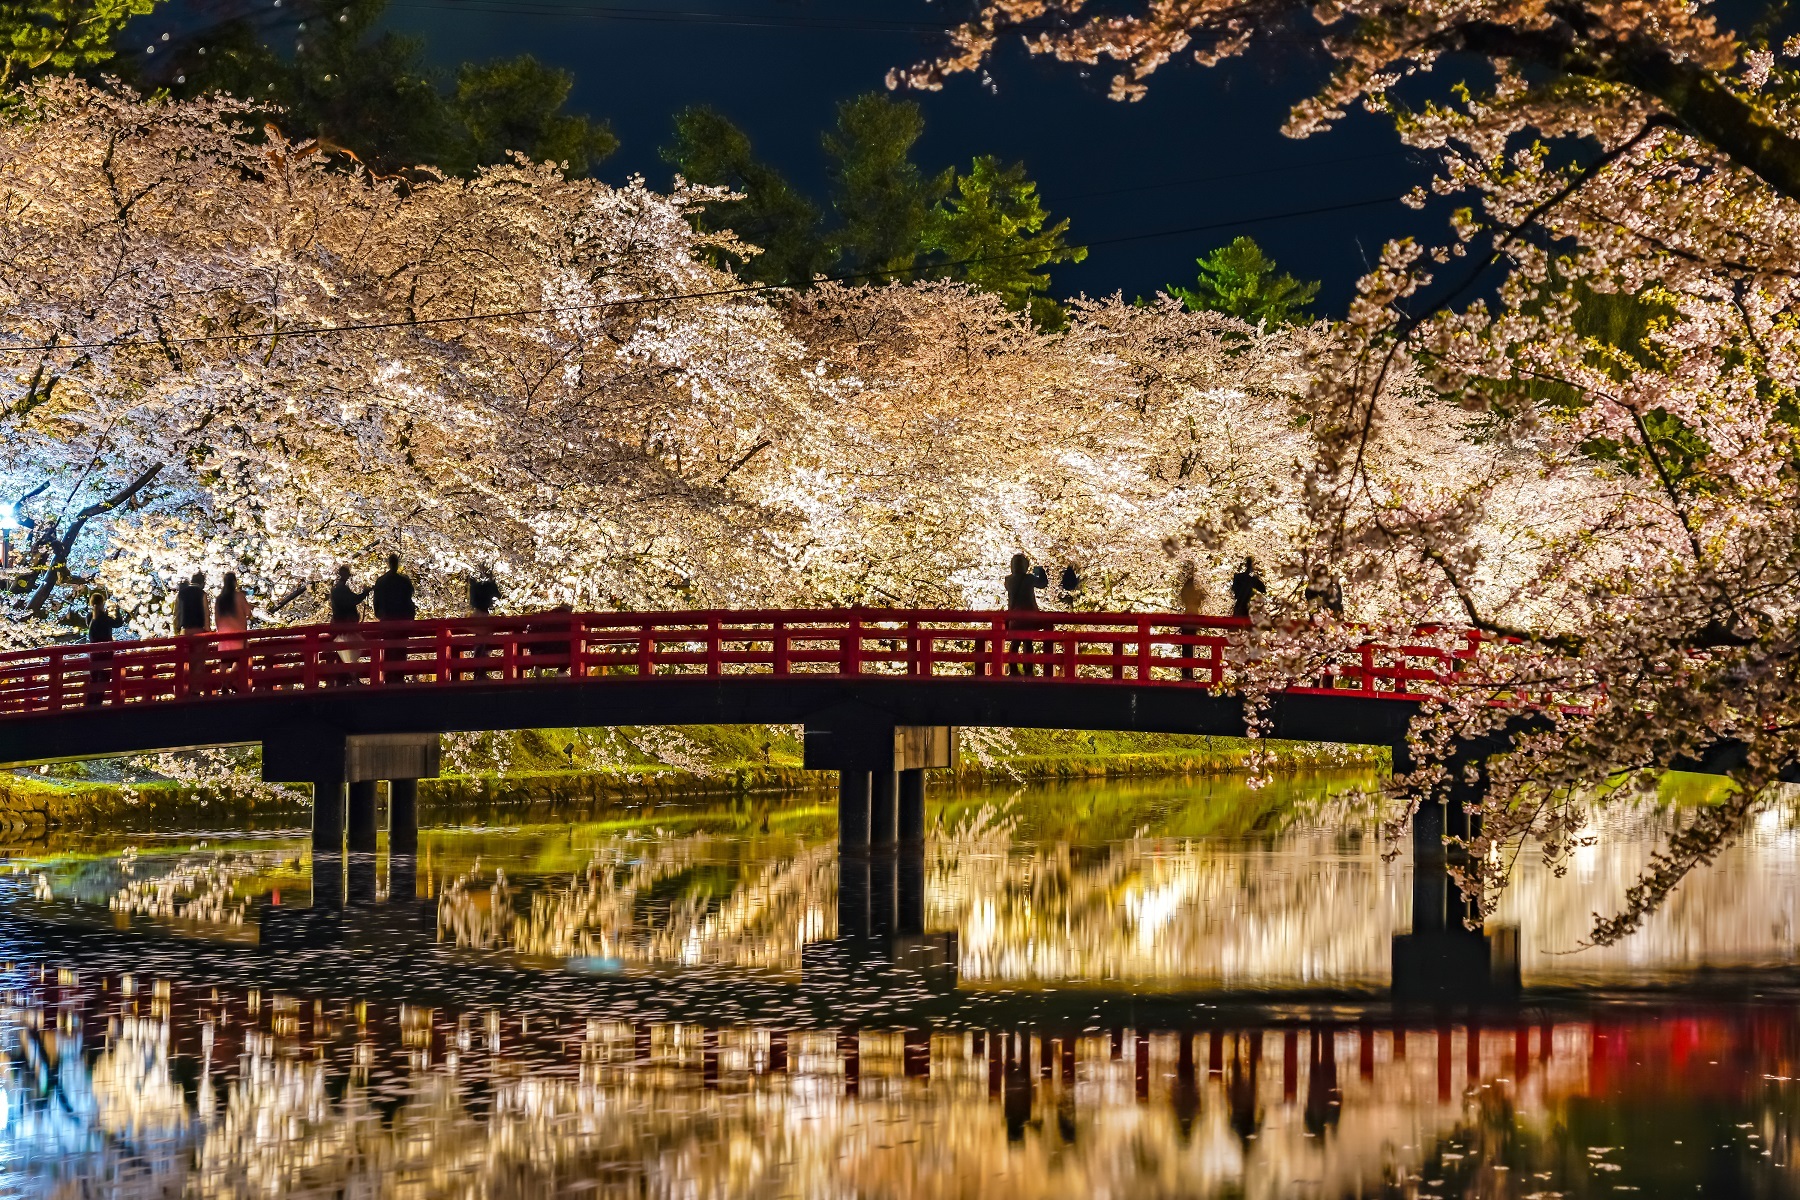 <p>Every spring, cherry trees (or <em>sakura</em>) blanket <a href="https://www.japan.travel/en/spot/654/">Hirosaki Park</a> in pink blooms, making it one of Japan’s best locations for appreciating this iconic blossom. The park is also famous for its old Somei-Yoshino cherry tree, which was planted in 1882.</p> <p>The Somei-Yoshino tree is always in full bloom in time for the <a href="https://www.hirosaki-kanko.or.jp/en/edit.html?id=cherry_blossom_festival">Hirosaki Cherry Blossom Festival</a>, a major annual highlight that features a <em>sakura</em> tunnel, illuminated bridges at night, music and performances. </p>